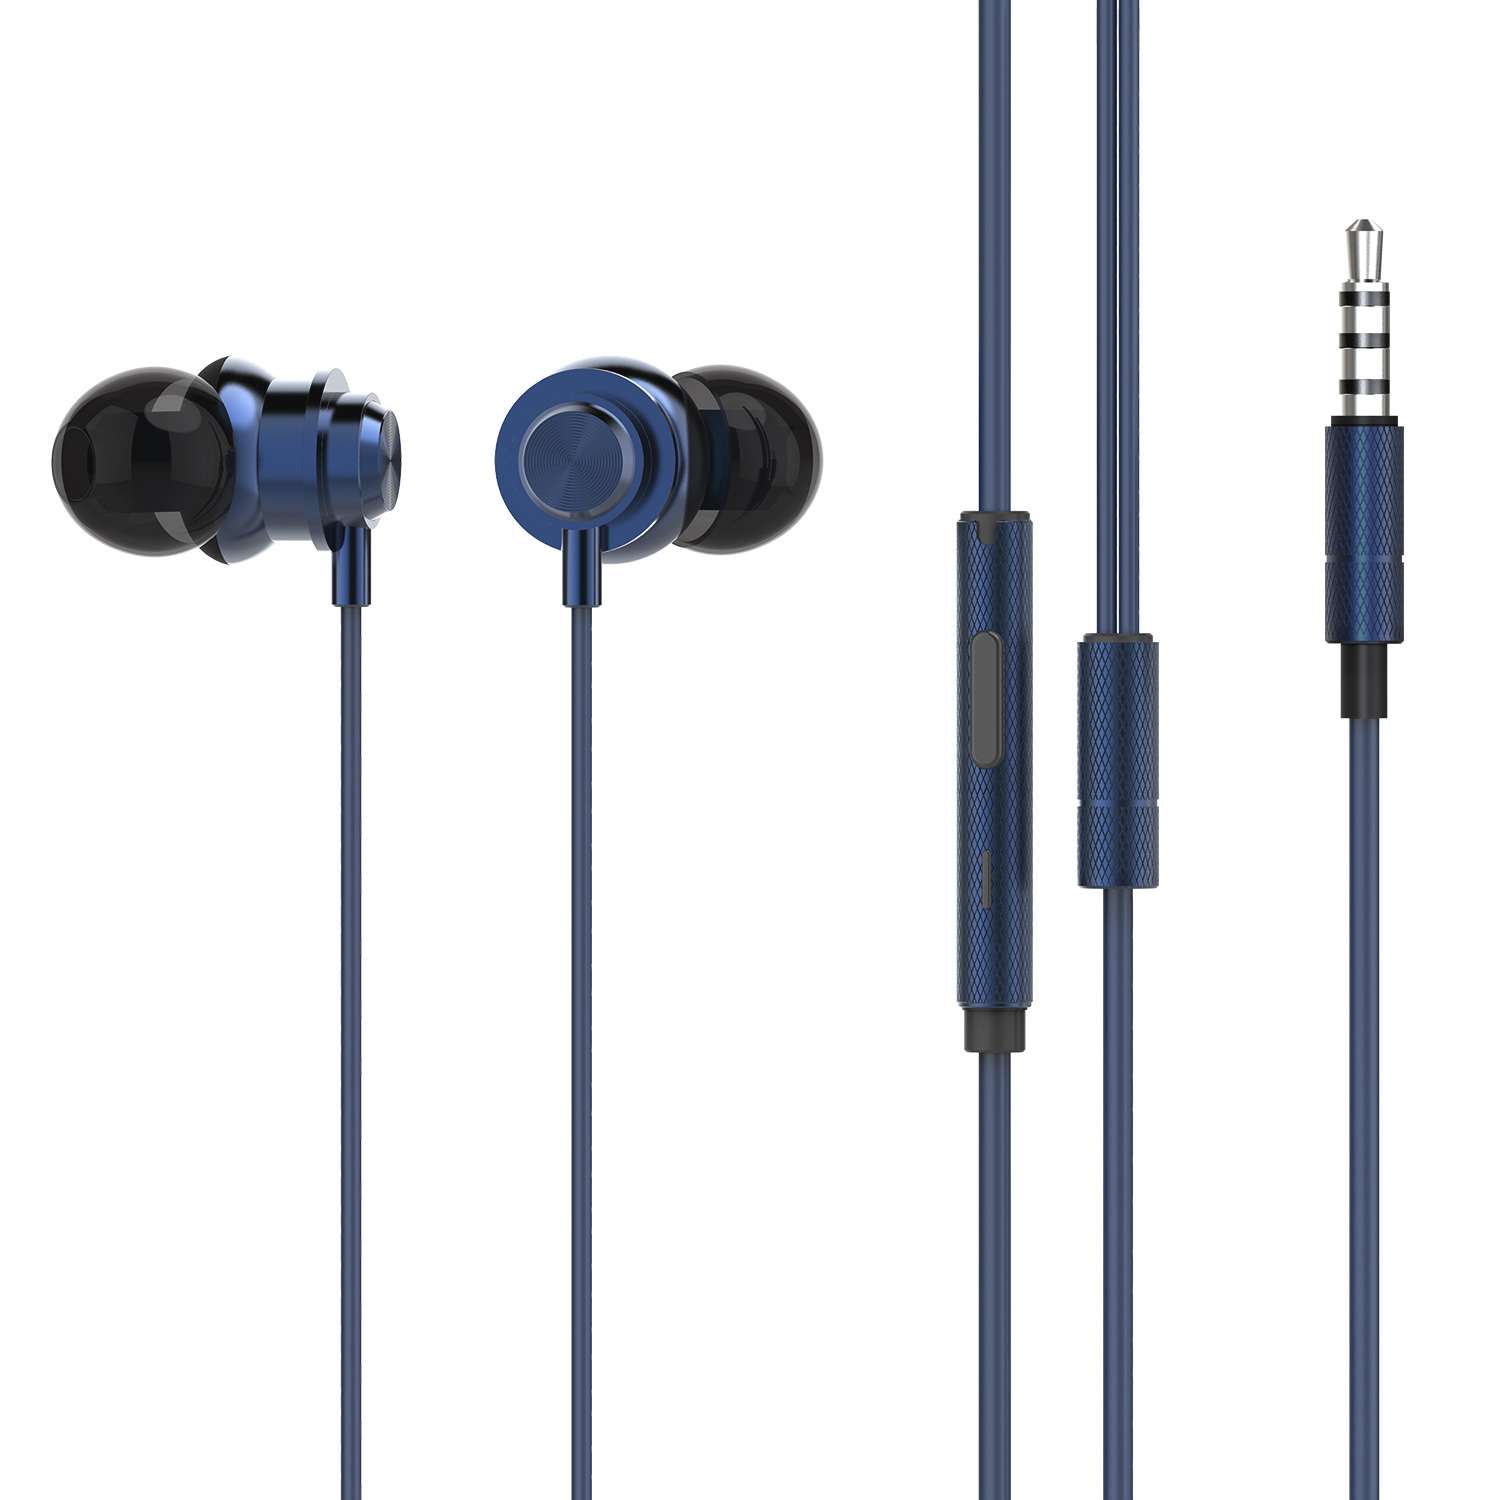 Original Plextone X56M 3.5mm Metal Wired Control in-Ear Earphone Noise Cancelling with HD Mic